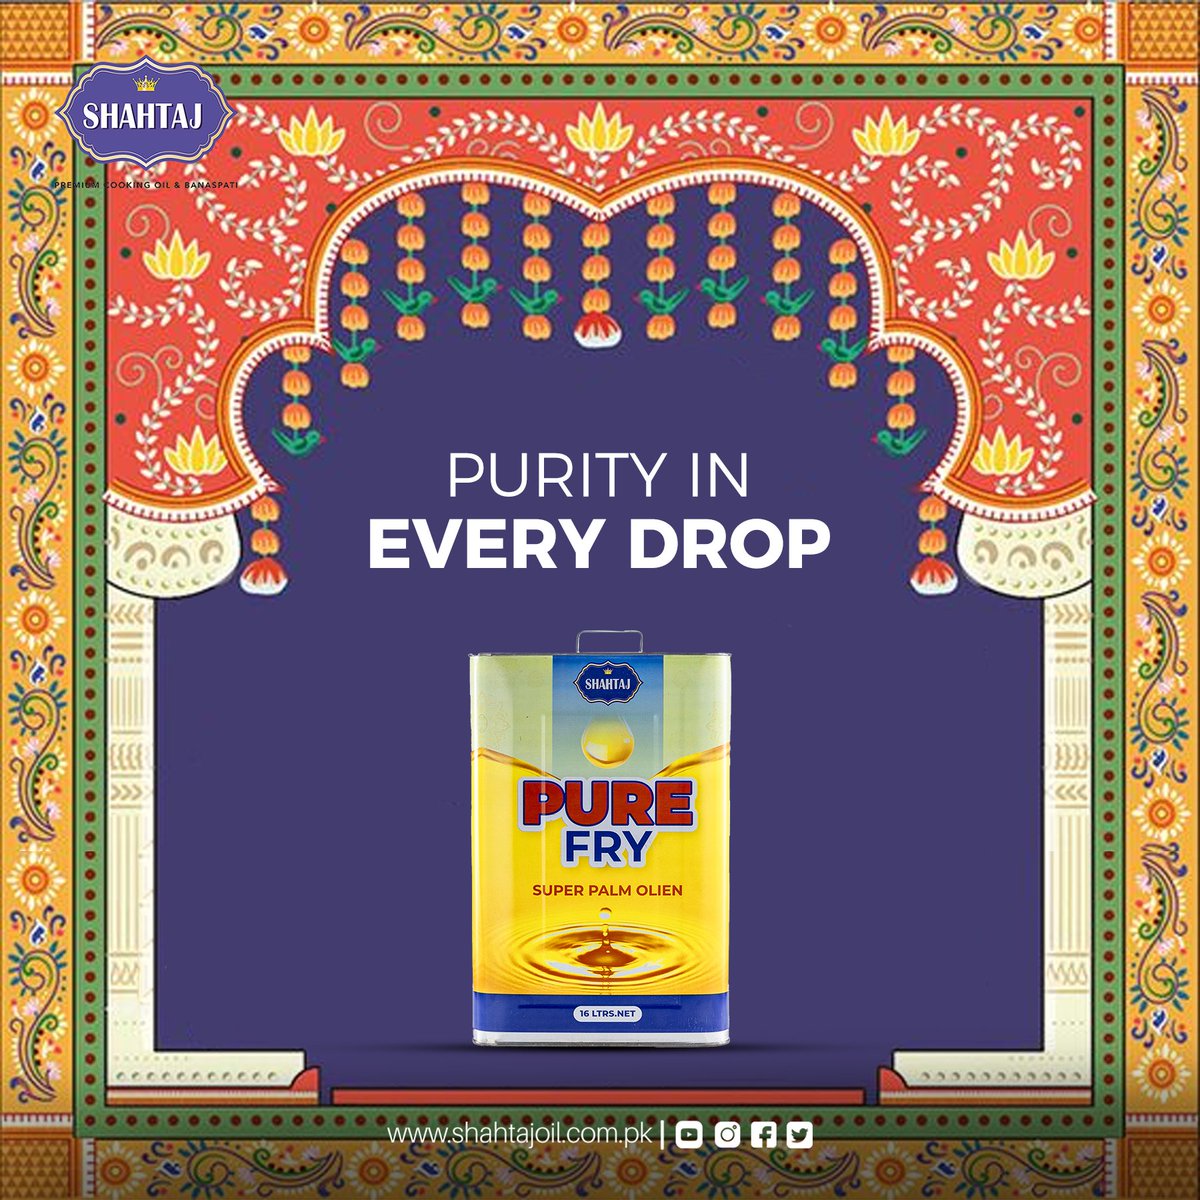 Dive into the essence of purity with Shahtaj Pure Fry Palm Oil.

Contact Us:
shahtajoil.com.pk
#PureFryPerfection #ShahtajCooksBest #PalmOilGoodness #CulinaryExcellence #ShahtajPureFry #PalmOilPerfection #CookingExcellence #PureAndHealthy #QualityCooking #CulinaryMagic